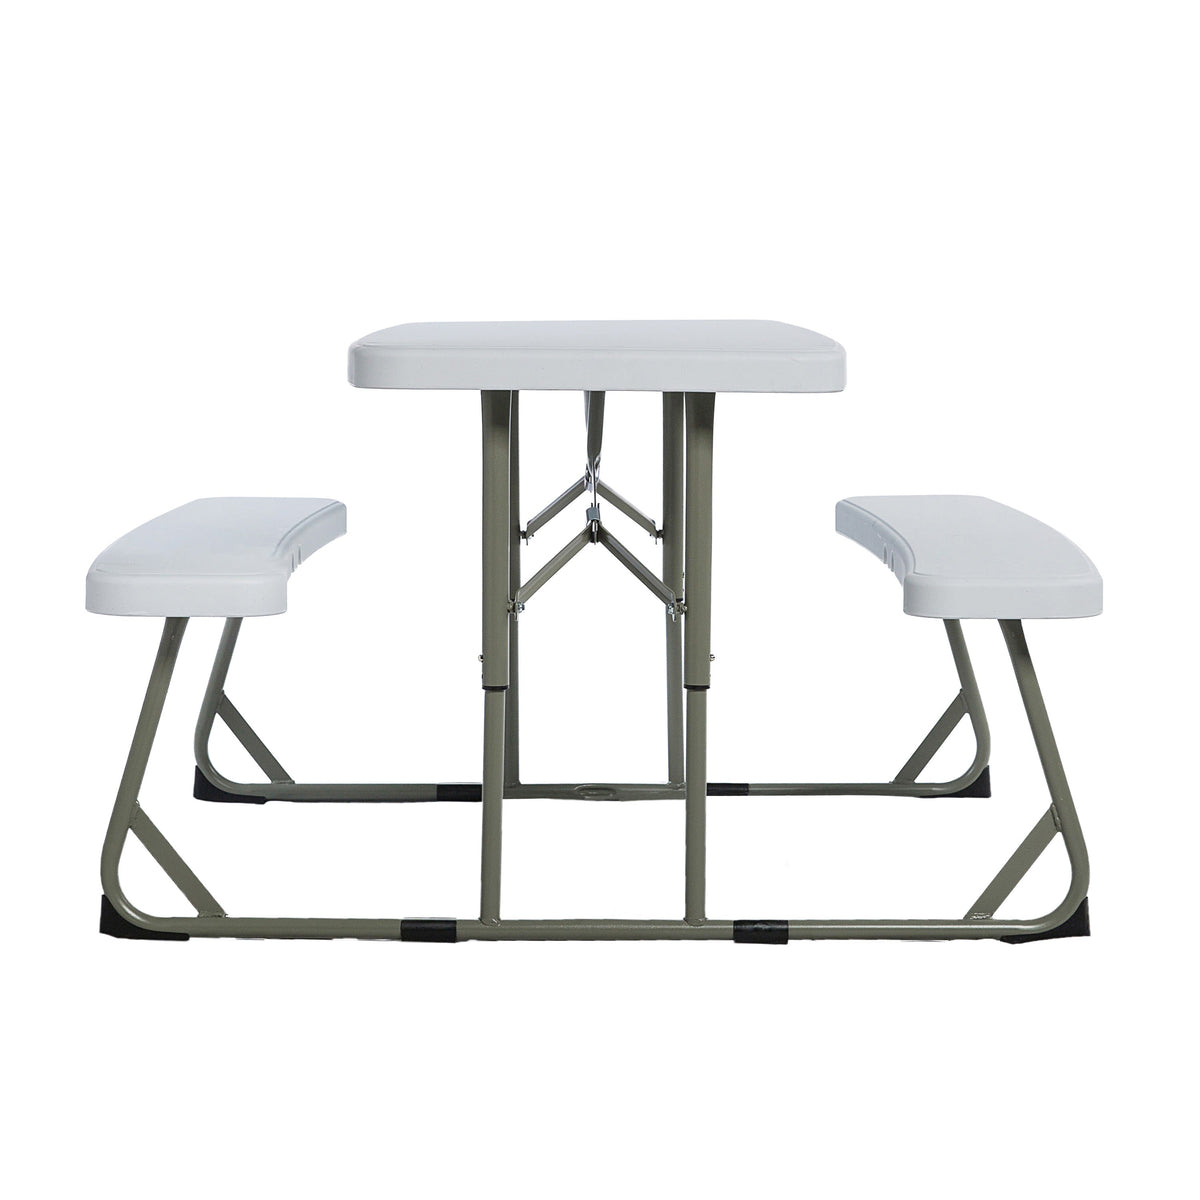 White |#| Indoor/Outdoor Commercial Grade Kids White Folding Picnic Table with Benches